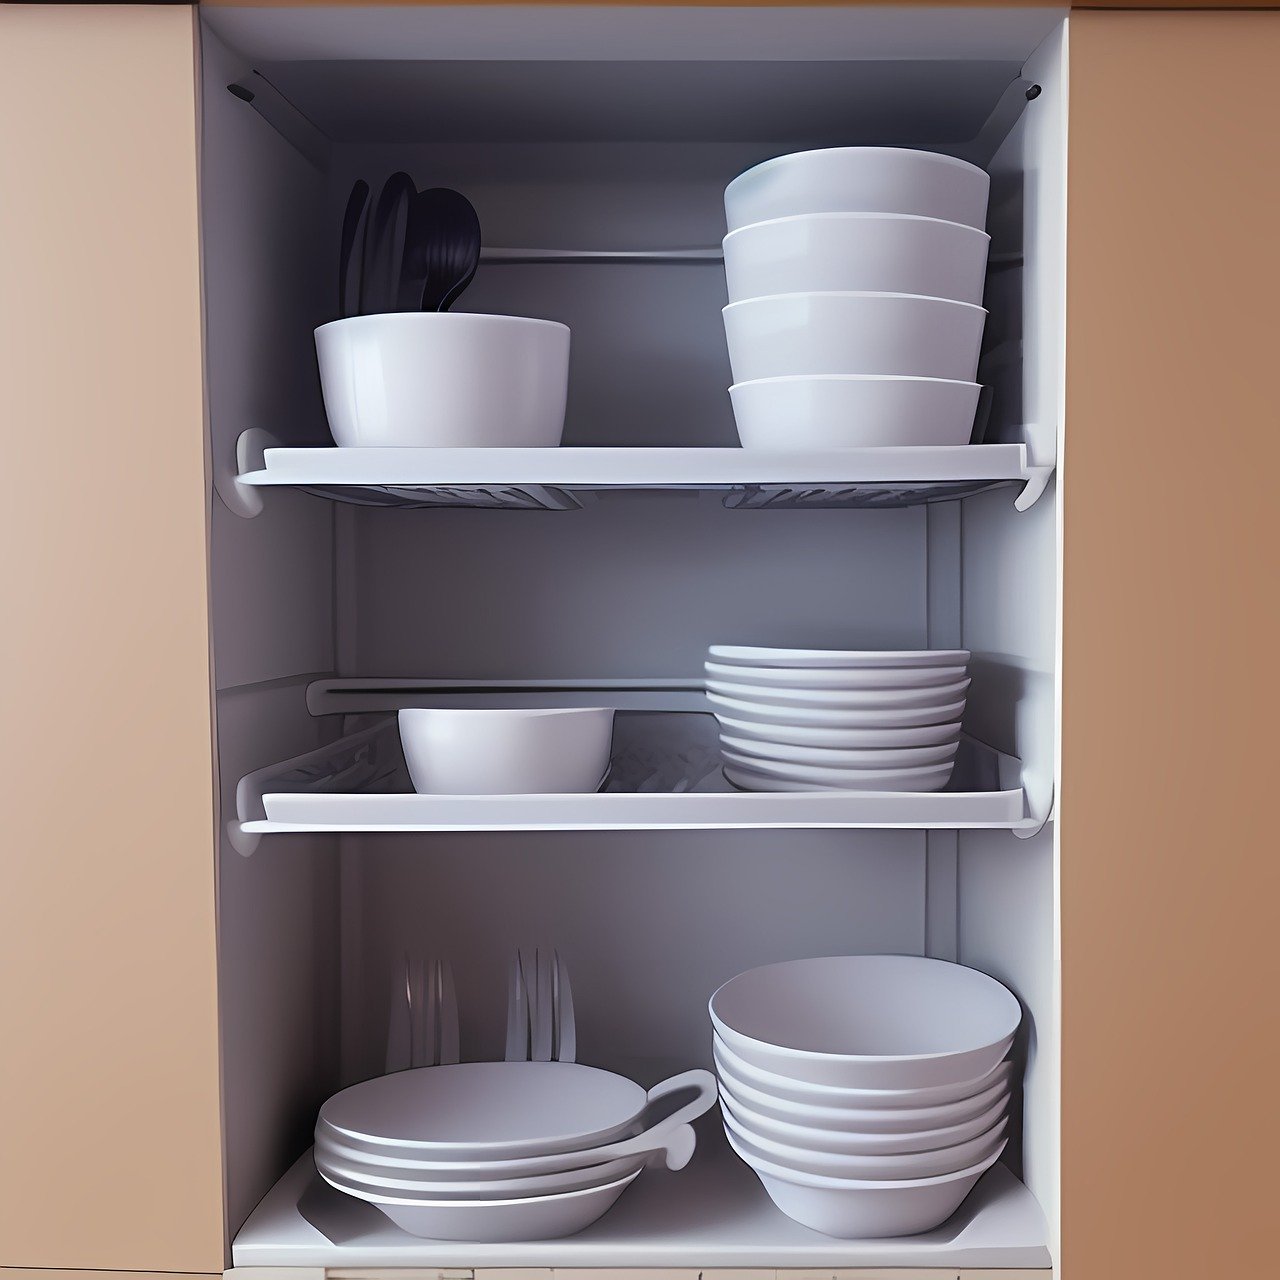 a clean kitchen cabinet with clean crockery